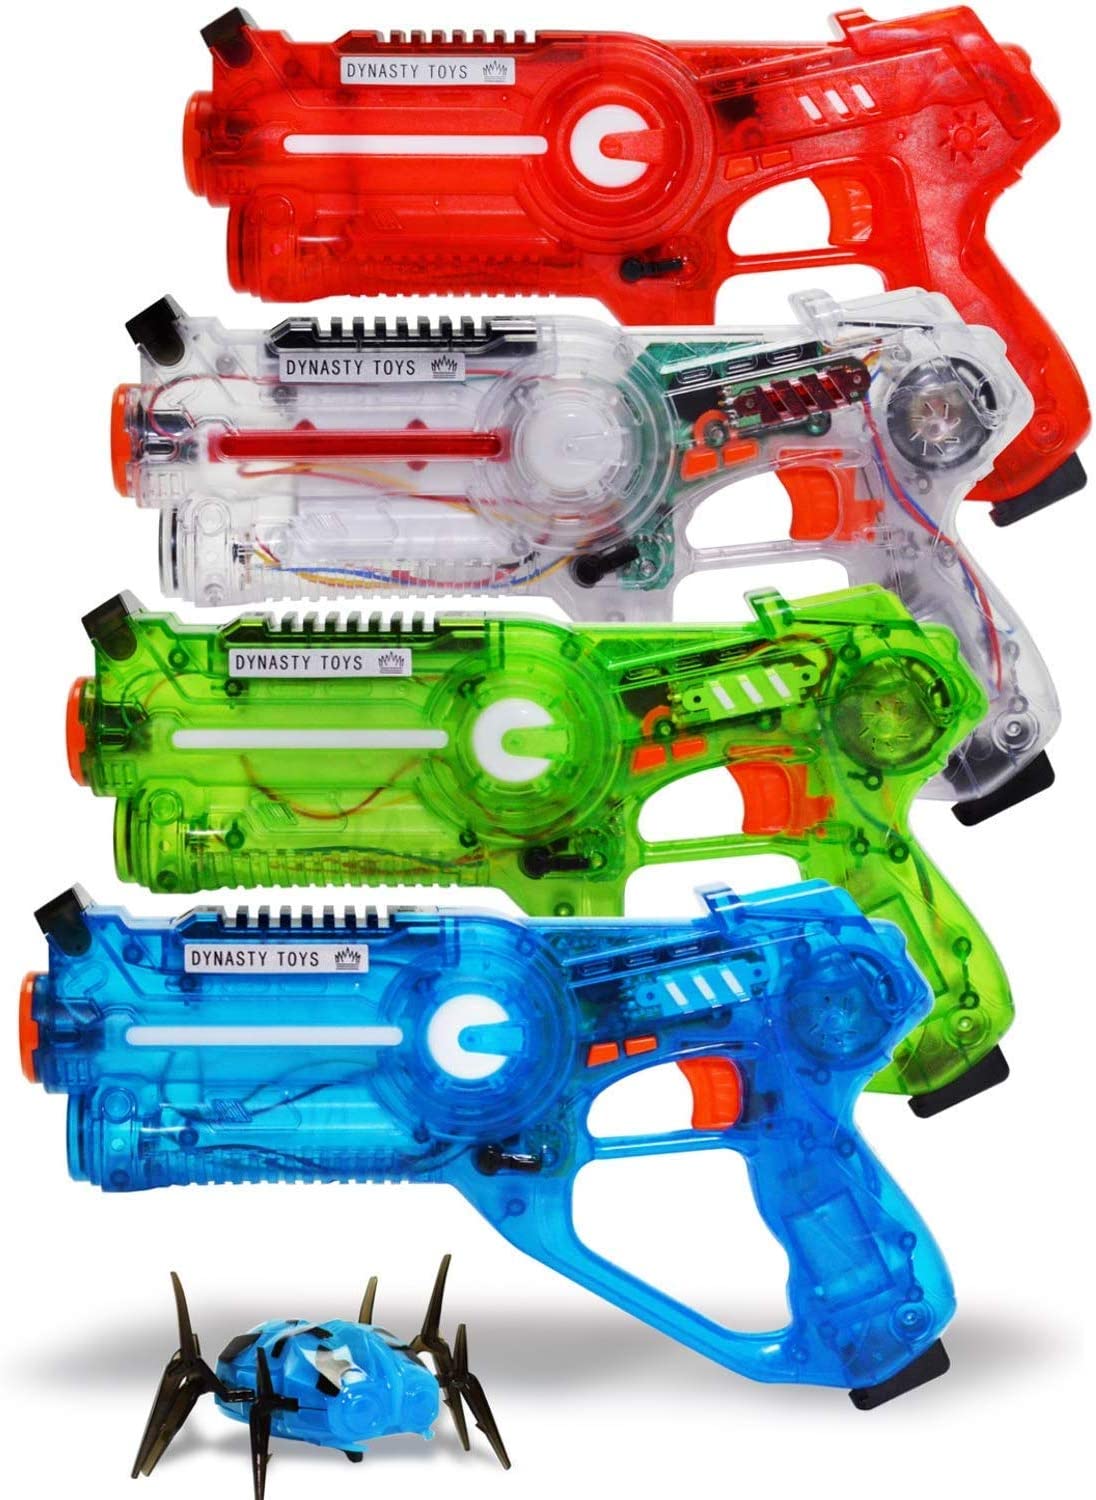 DYNASTY TOYS Family Laser Tag Set, 4-Pack